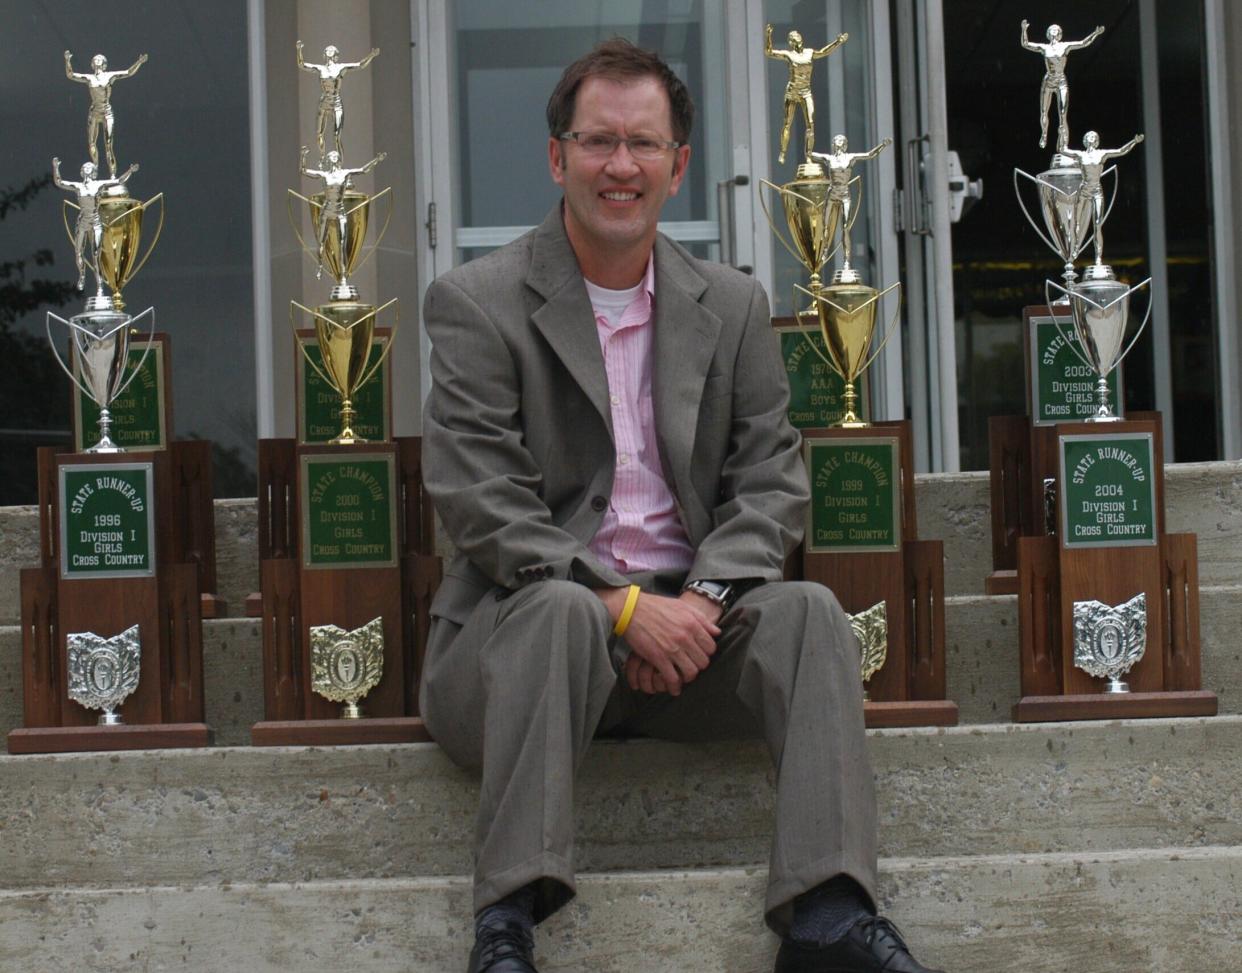 In a 2009 photo, Ron Russo sat among the eight Ohio High School Athletic Association trophies he had helped deliver to Colerain High School. He left Colerain to assume head coaching responsibilities at McAuley High School.